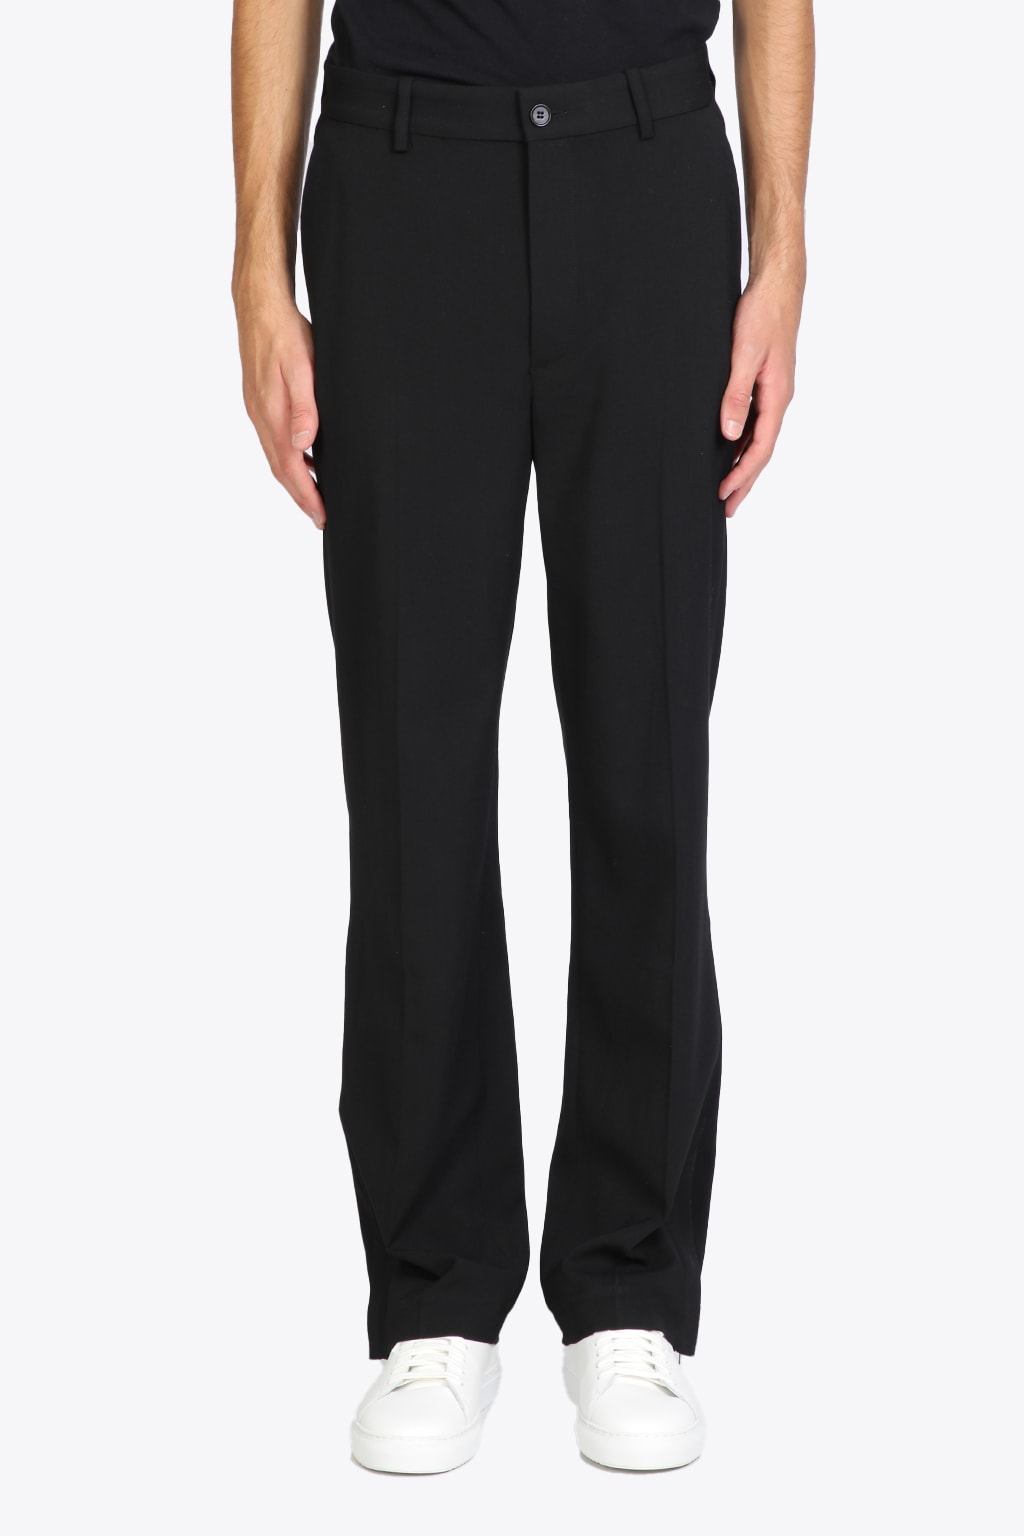 Axel Arigato Grade Trousers Black viscose tailored pant with ankle vent - Grade trousers